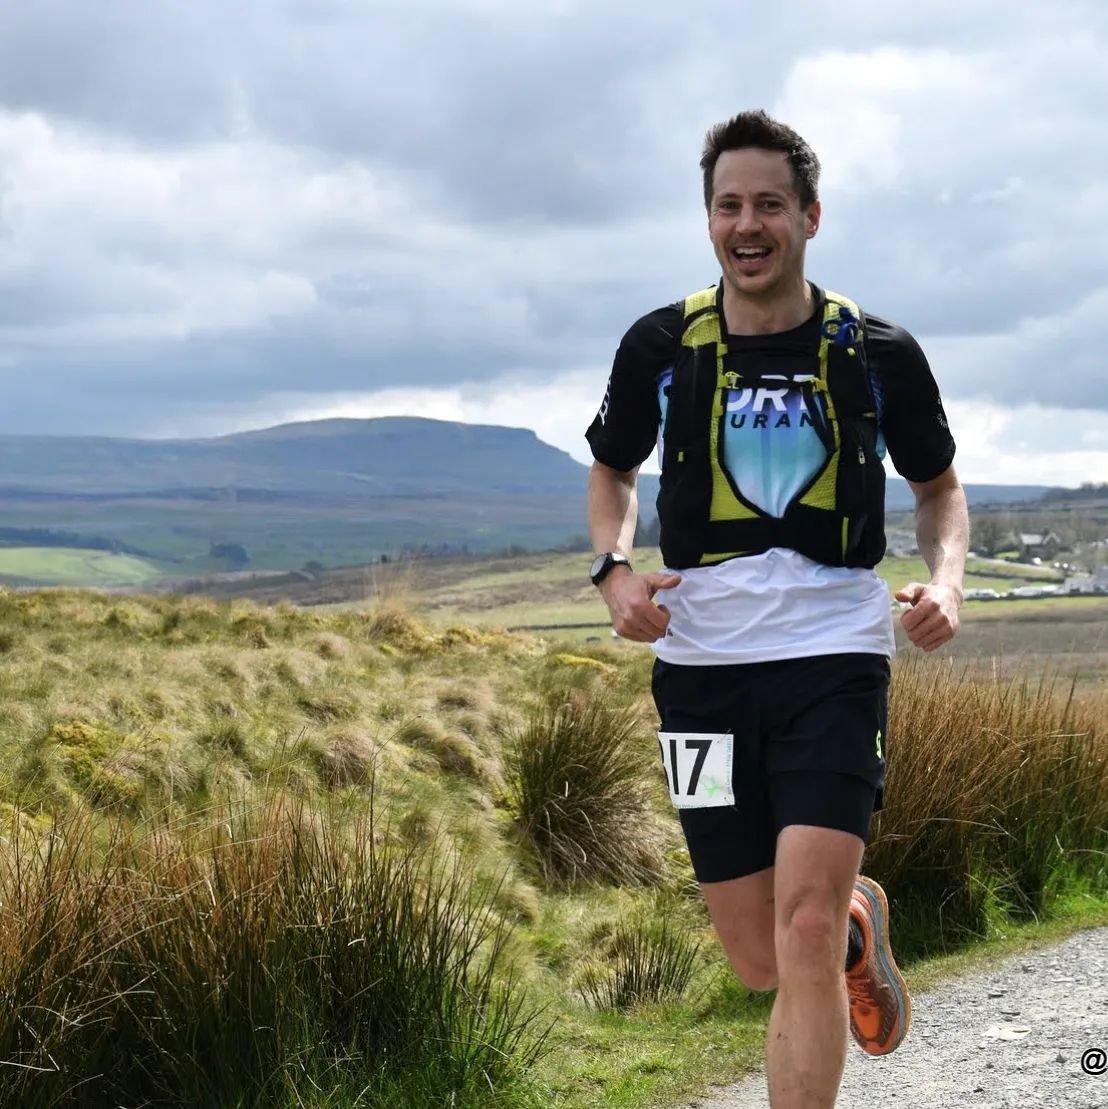 Hail the trail 🏃&zwj;♂️🏃&zwj;♀️⛰️

The 69th Three Peaks Race 🏃&zwj;♂️⛰️⛰️⛰️
Last weekend 3 club athletes took on the historic fell race which covers a 24 mile route including the Yorkshire Three Peaks of Pen-y-ghent (694m), Whernside (736m) and In